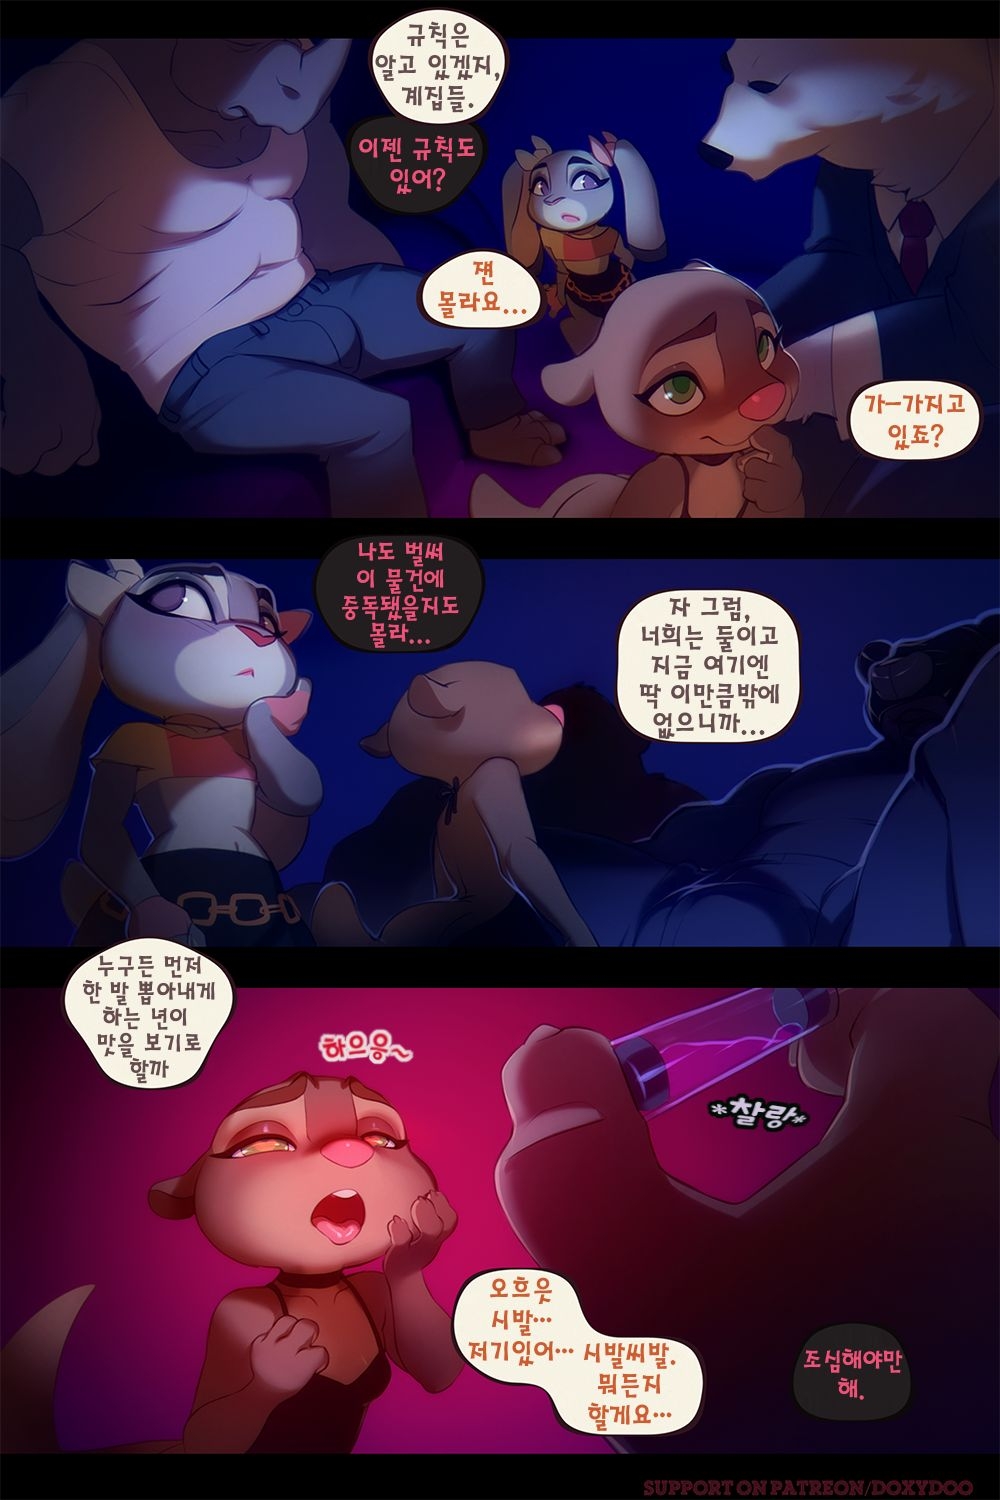 [Doxy] Sweet Sting Part 2: Down The Rabbit Hole | 달콤한 함정수사 2부: 토끼 굴속으로 (Zootopia) [Korean] [Ongoing] 9